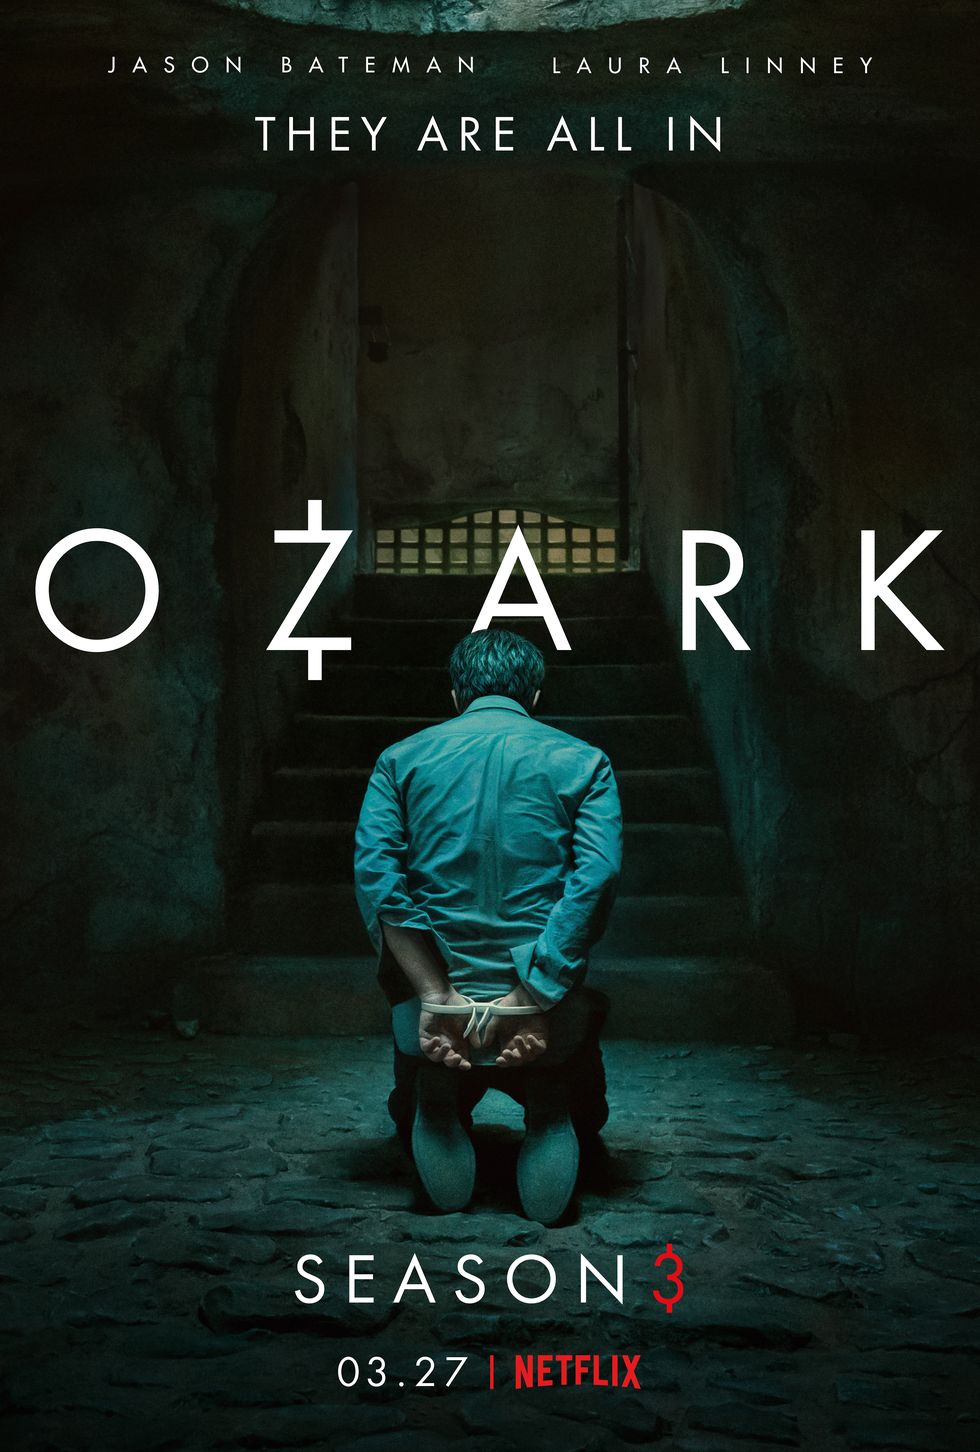 Your complete Songs From Season 3 of ‘Ozark’